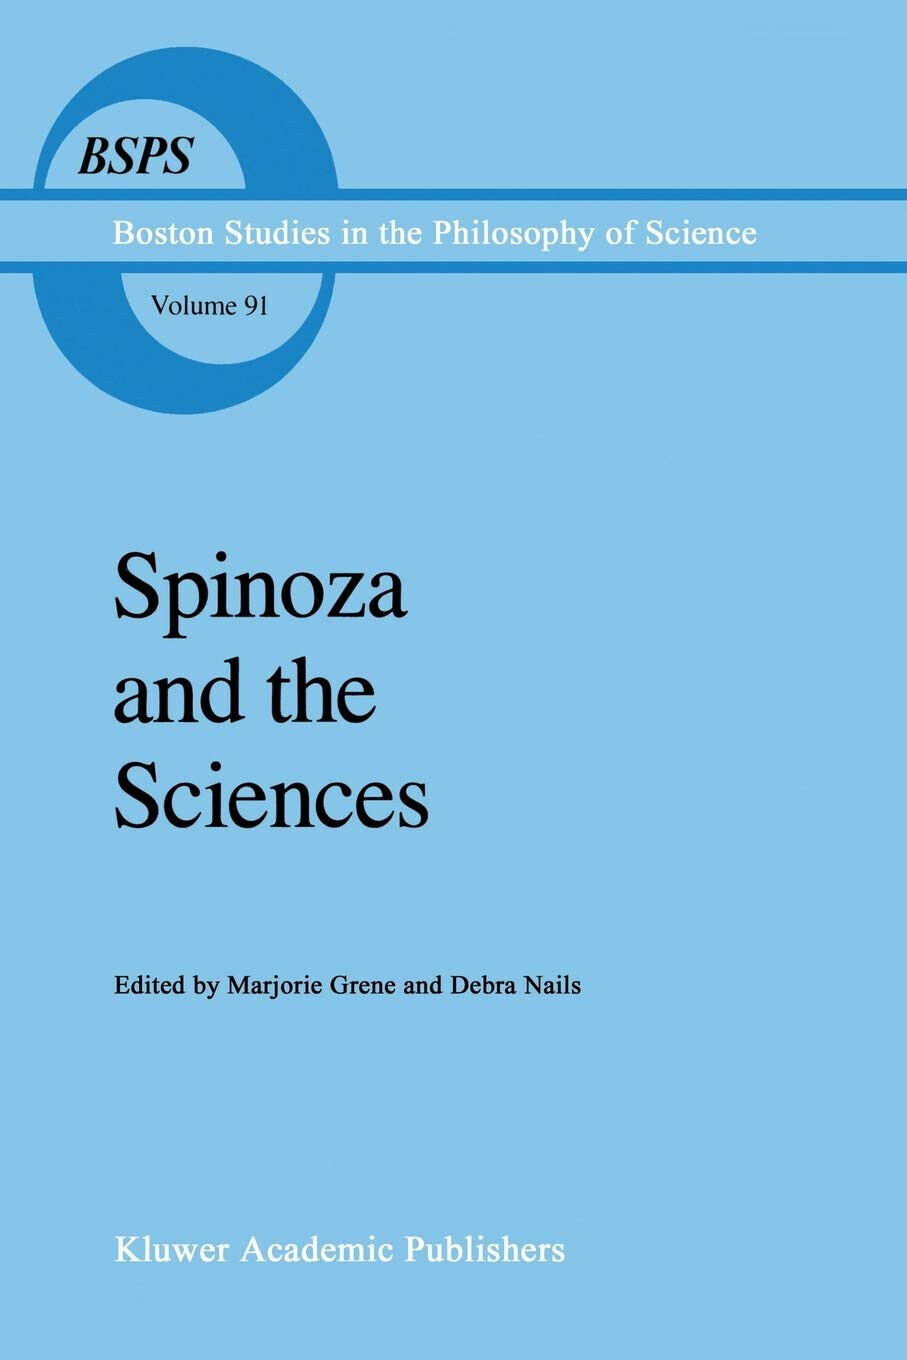 Spinoza and the Sciences - Marjorie Grene - Springer, 2011